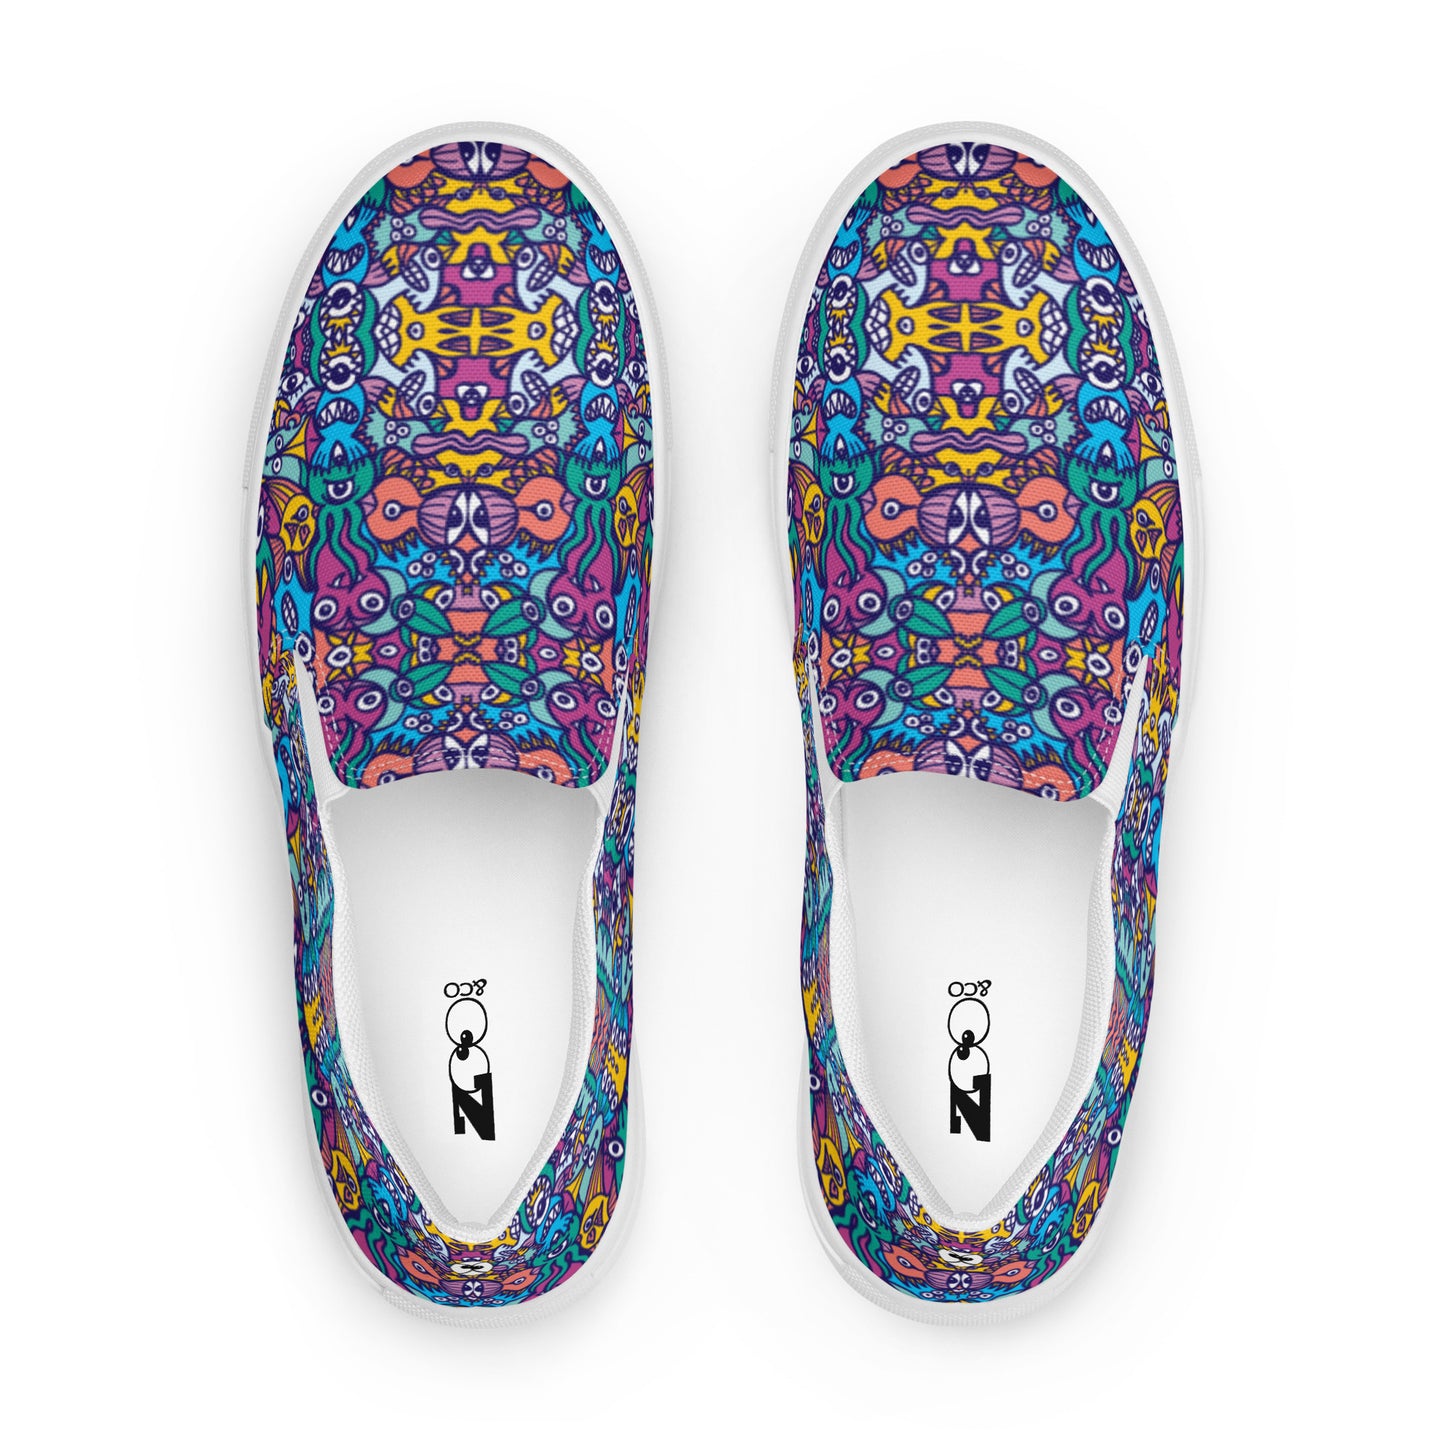 Whimsical design featuring multicolor critters from another world Women’s slip-on canvas shoes. Top view